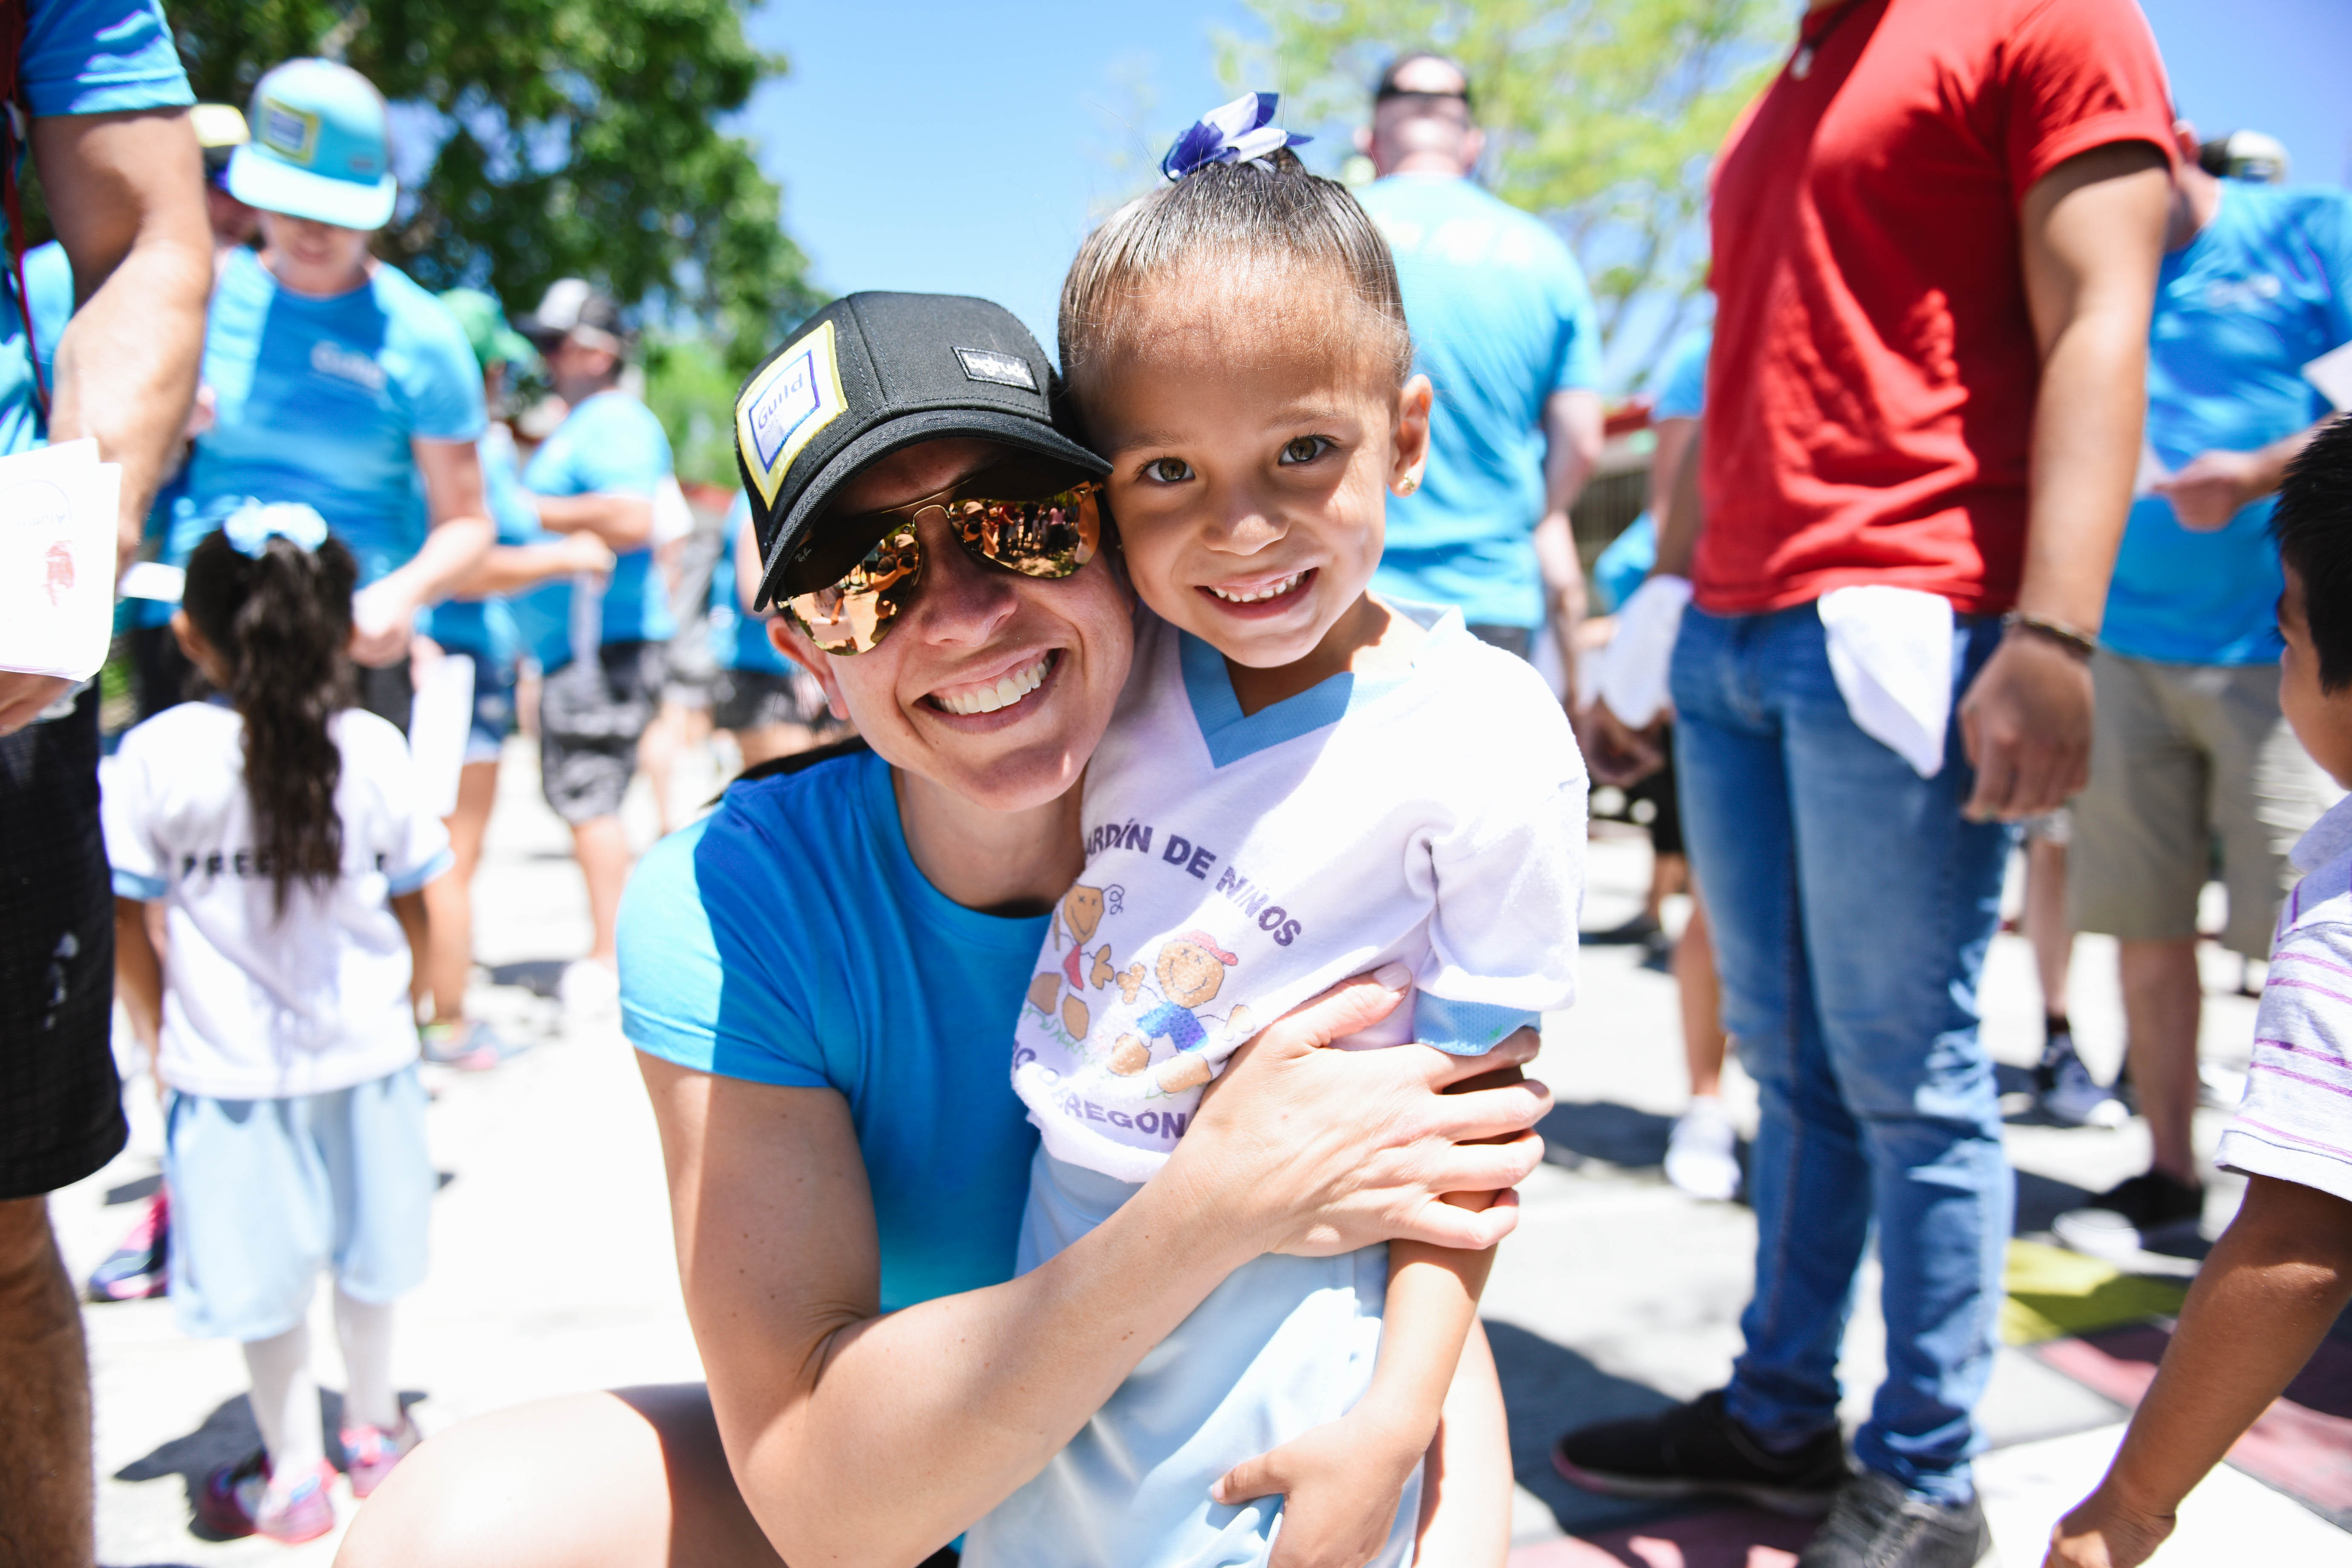 Nearly 300 employees and senior managers from Guild Mortgage recently spent a day renovating a primary school and engaging with local students in Playa Del Carmen, Mexico